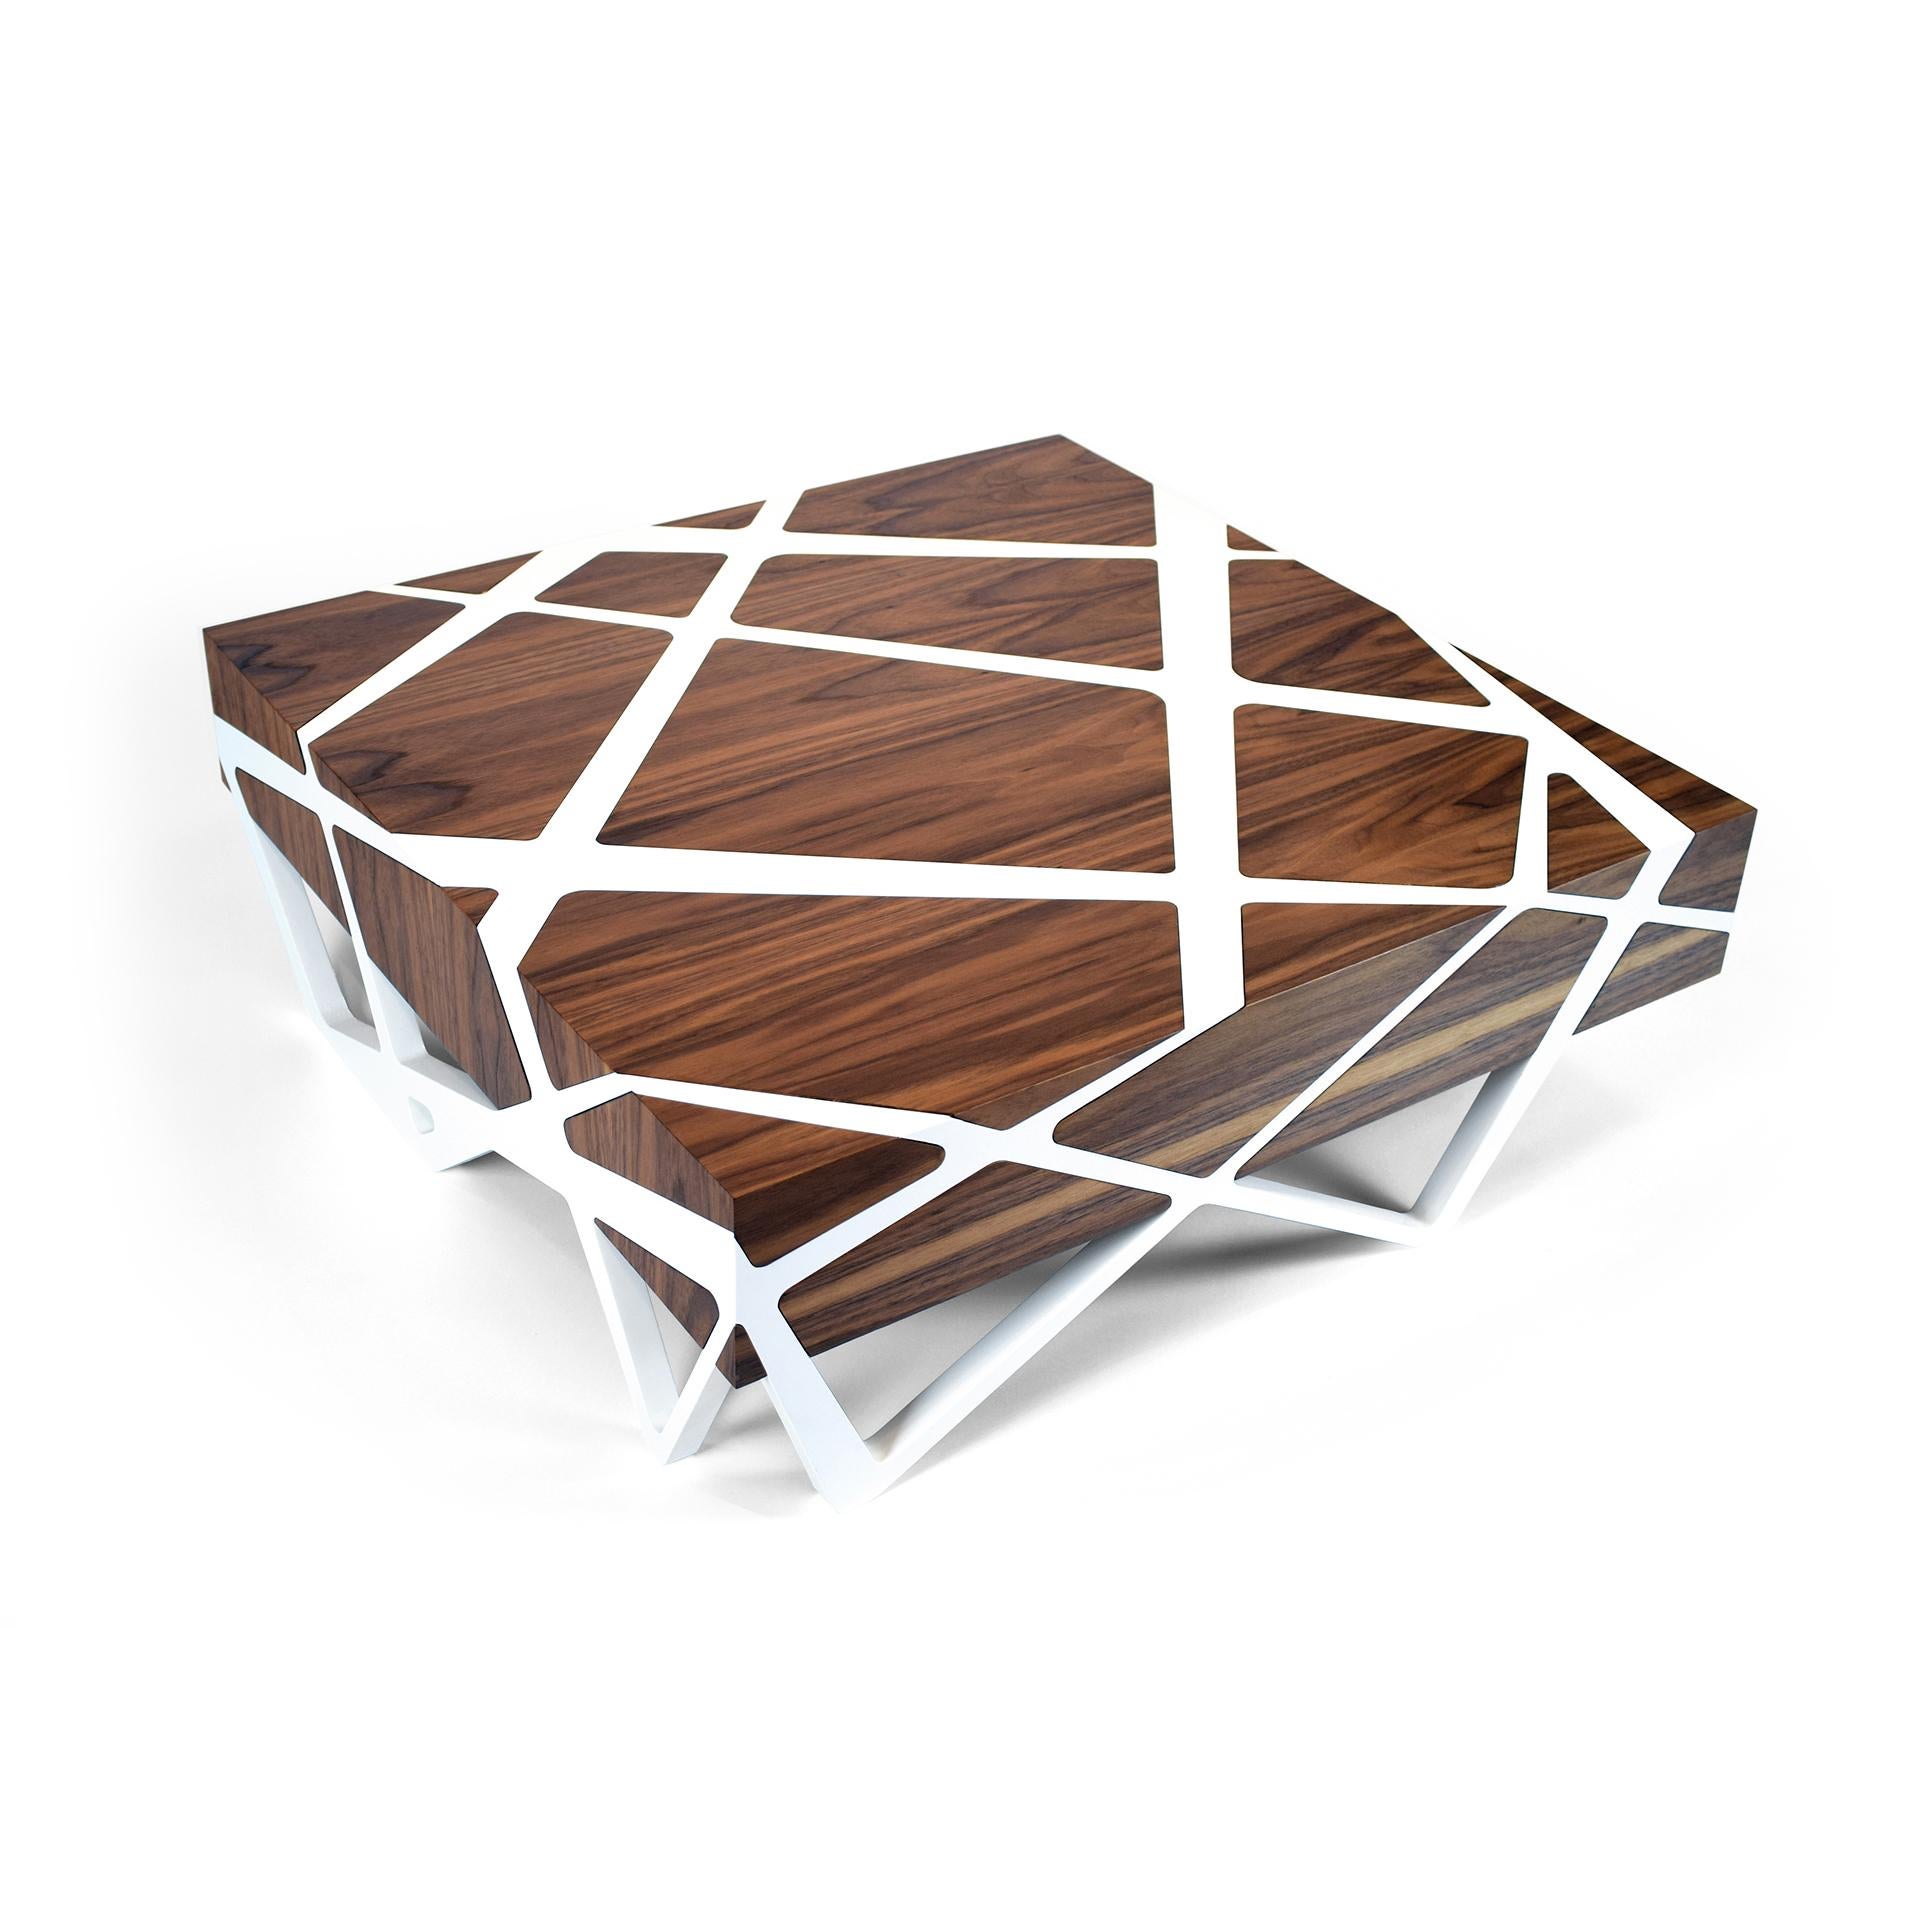 Inspired by the Sacred Ceiba trees in Havana, this elegant coffee table is handcrafted with carefully selected walnut wood veneer and white lacquered wood.

The 